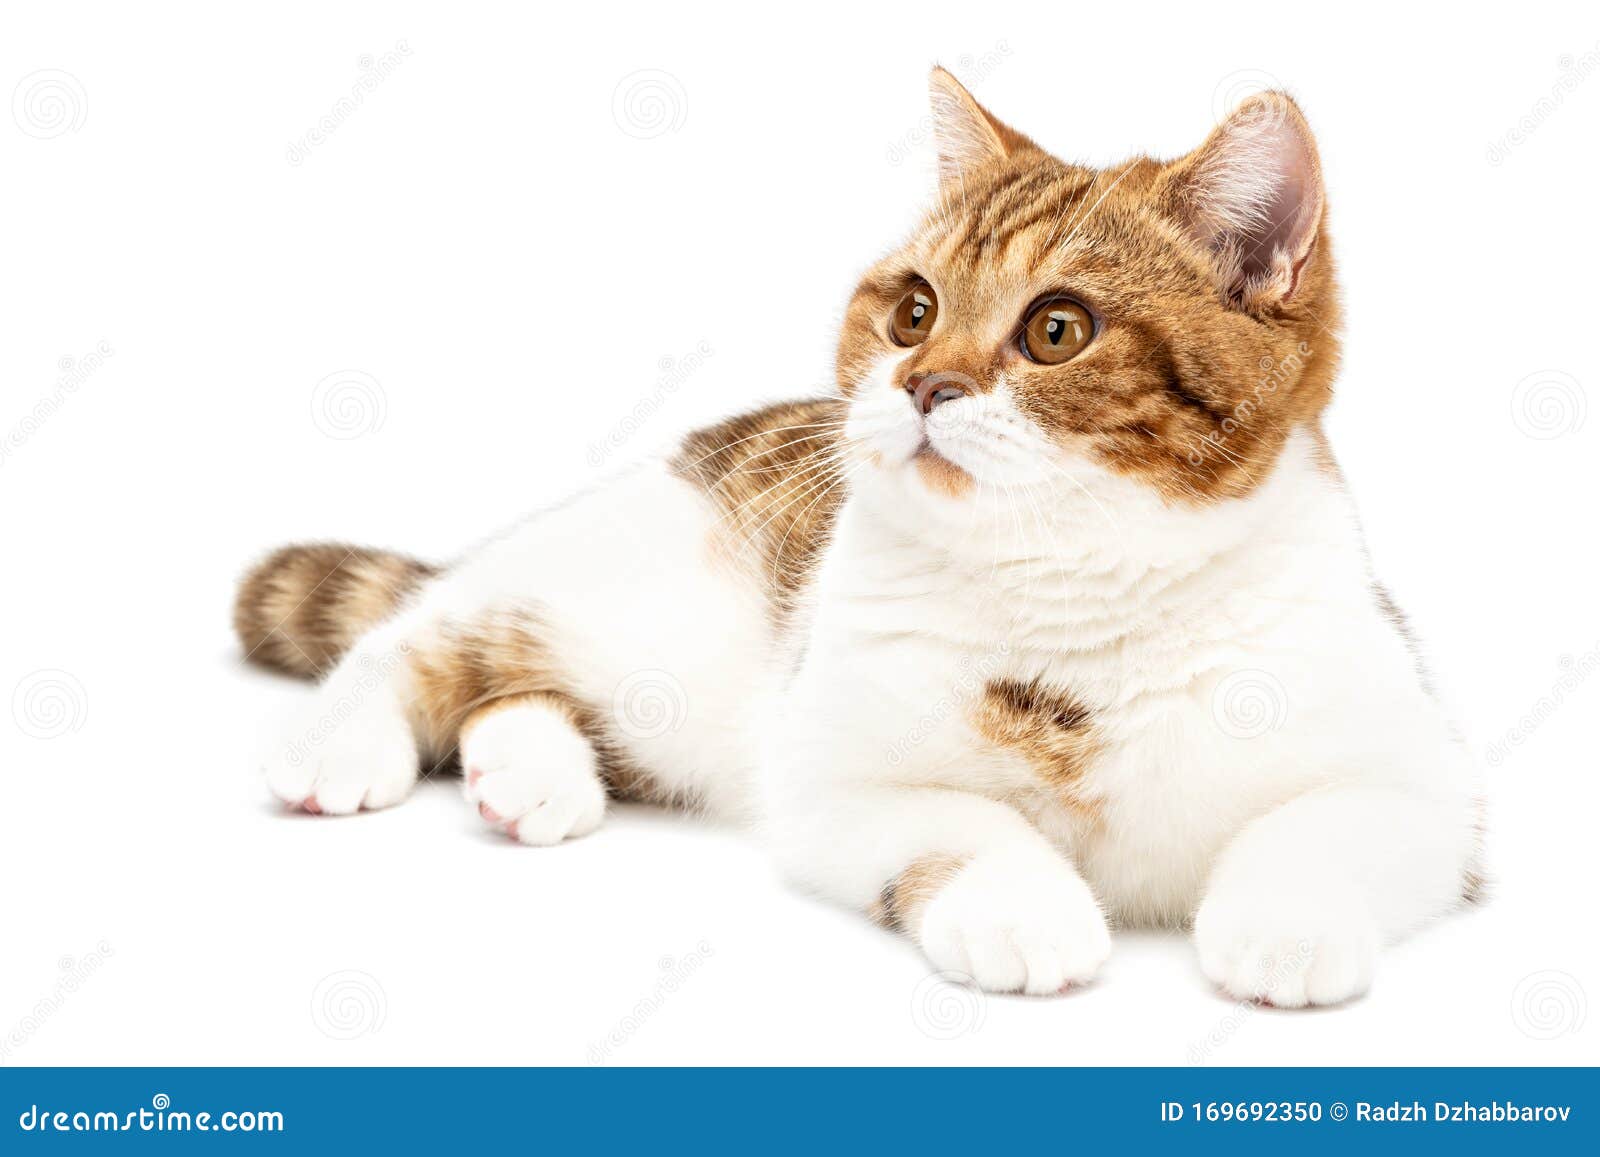 British Cat Lying Isolated On White Background. Young Shorthair Cat